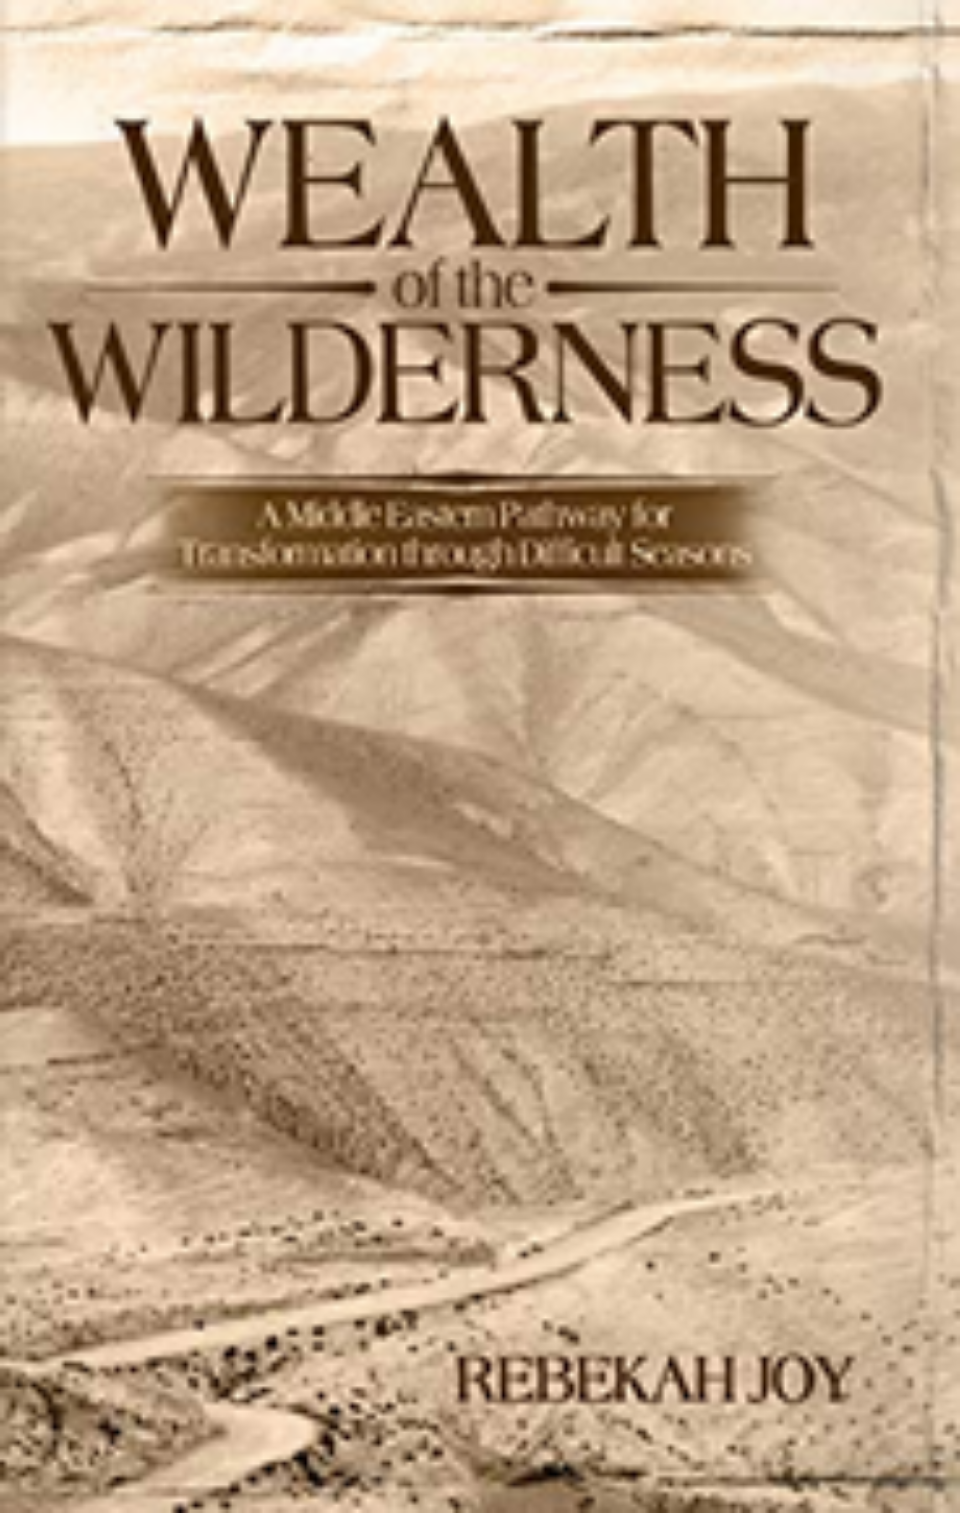 Congratulations to Letty and also Kimberly Bright who each won ebook copies of Wealth of the Wilderness.